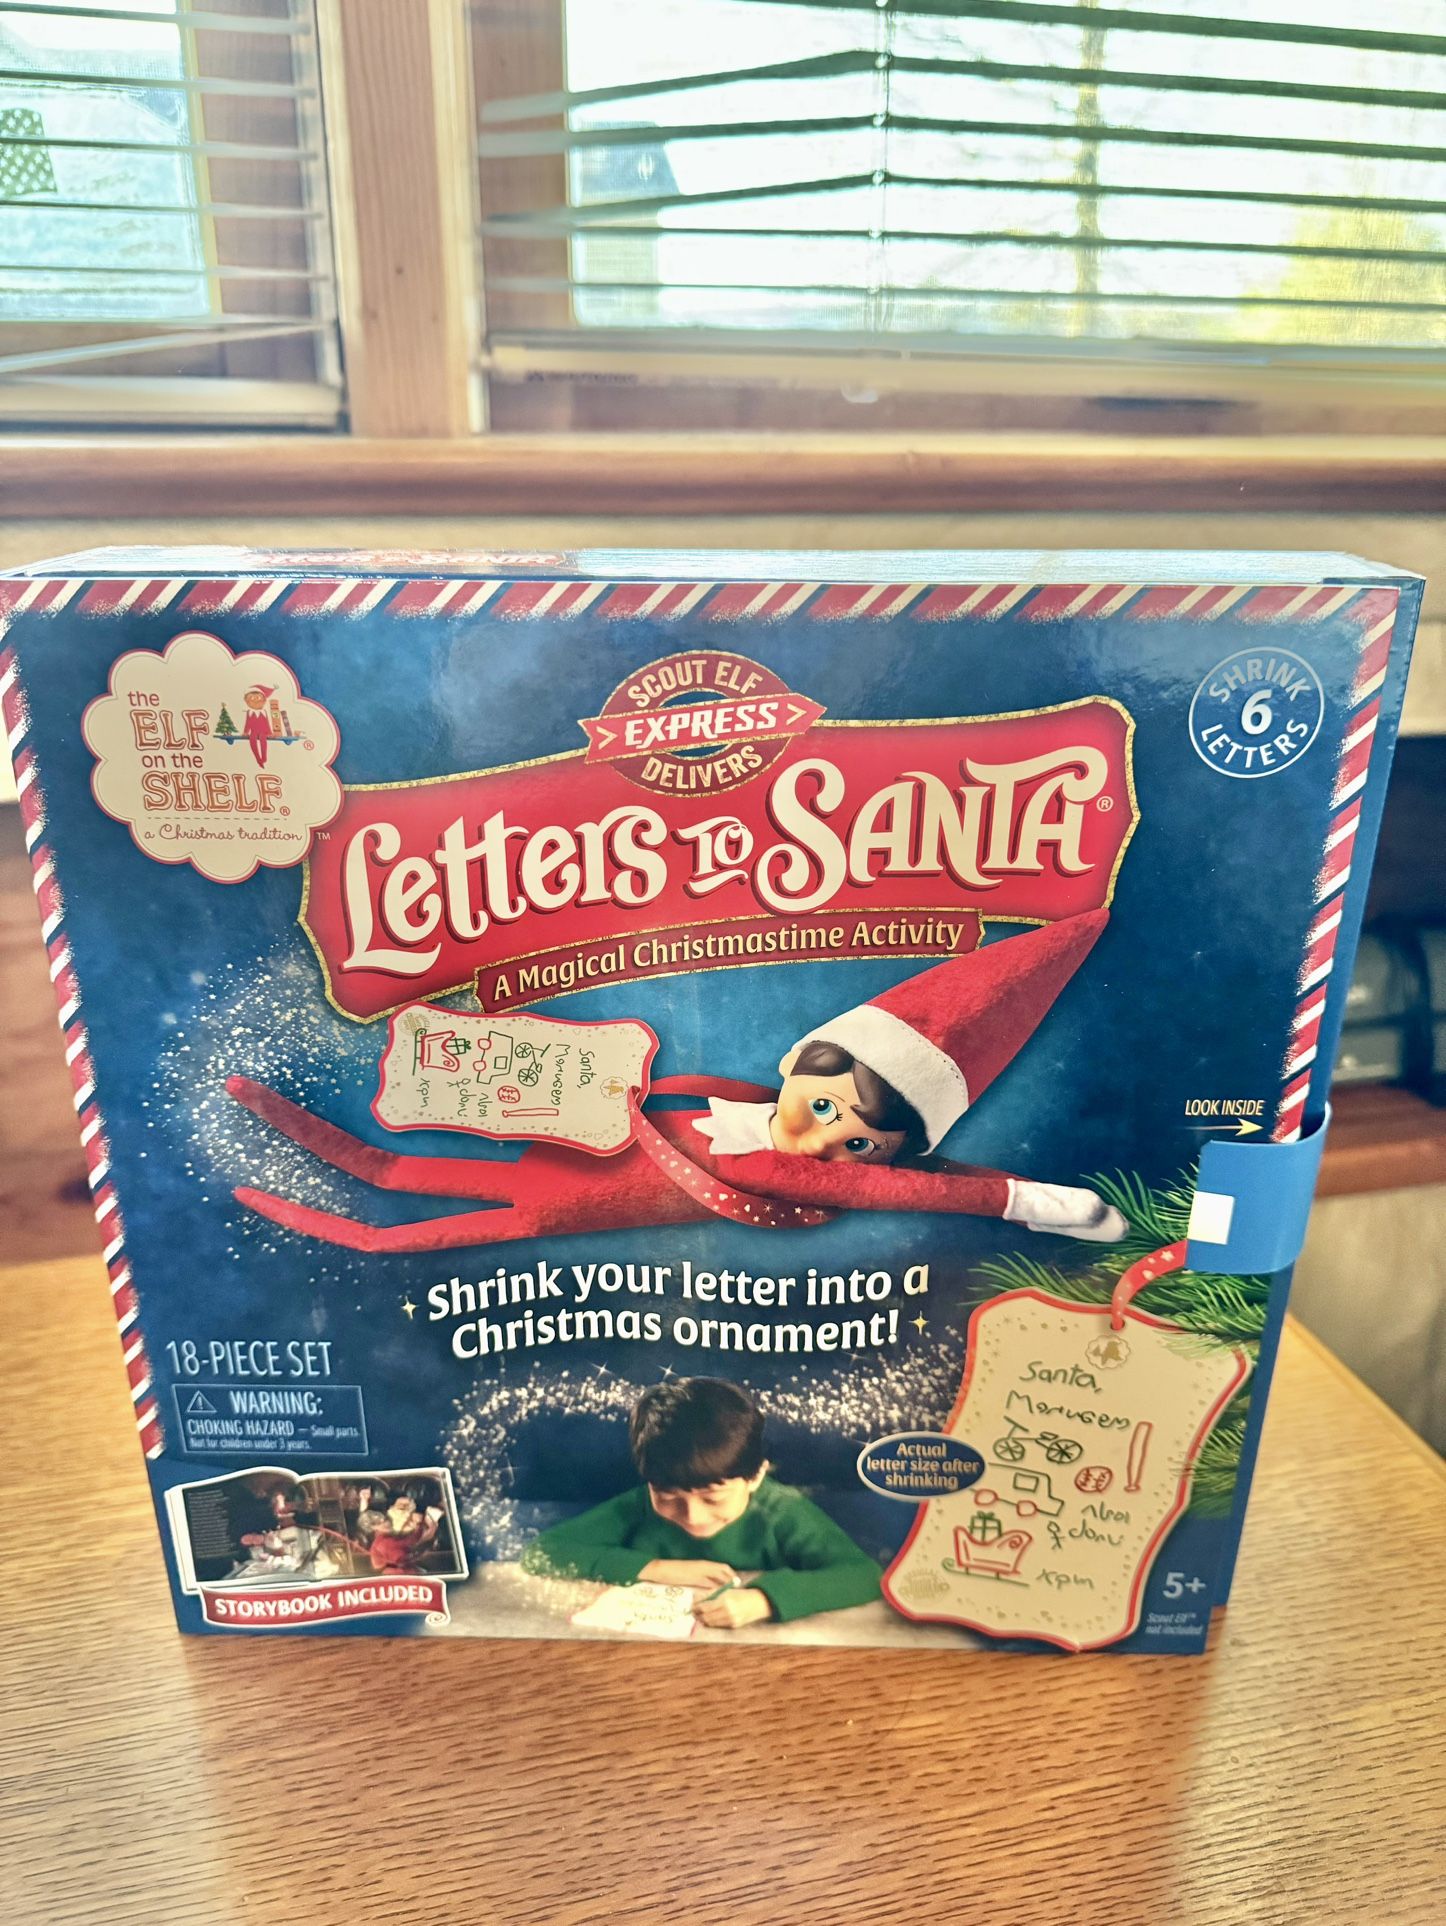 NIB Elf on the Shelf LETTERS TO SANTA Shrinky Dink Ornament with Hard Cover Book